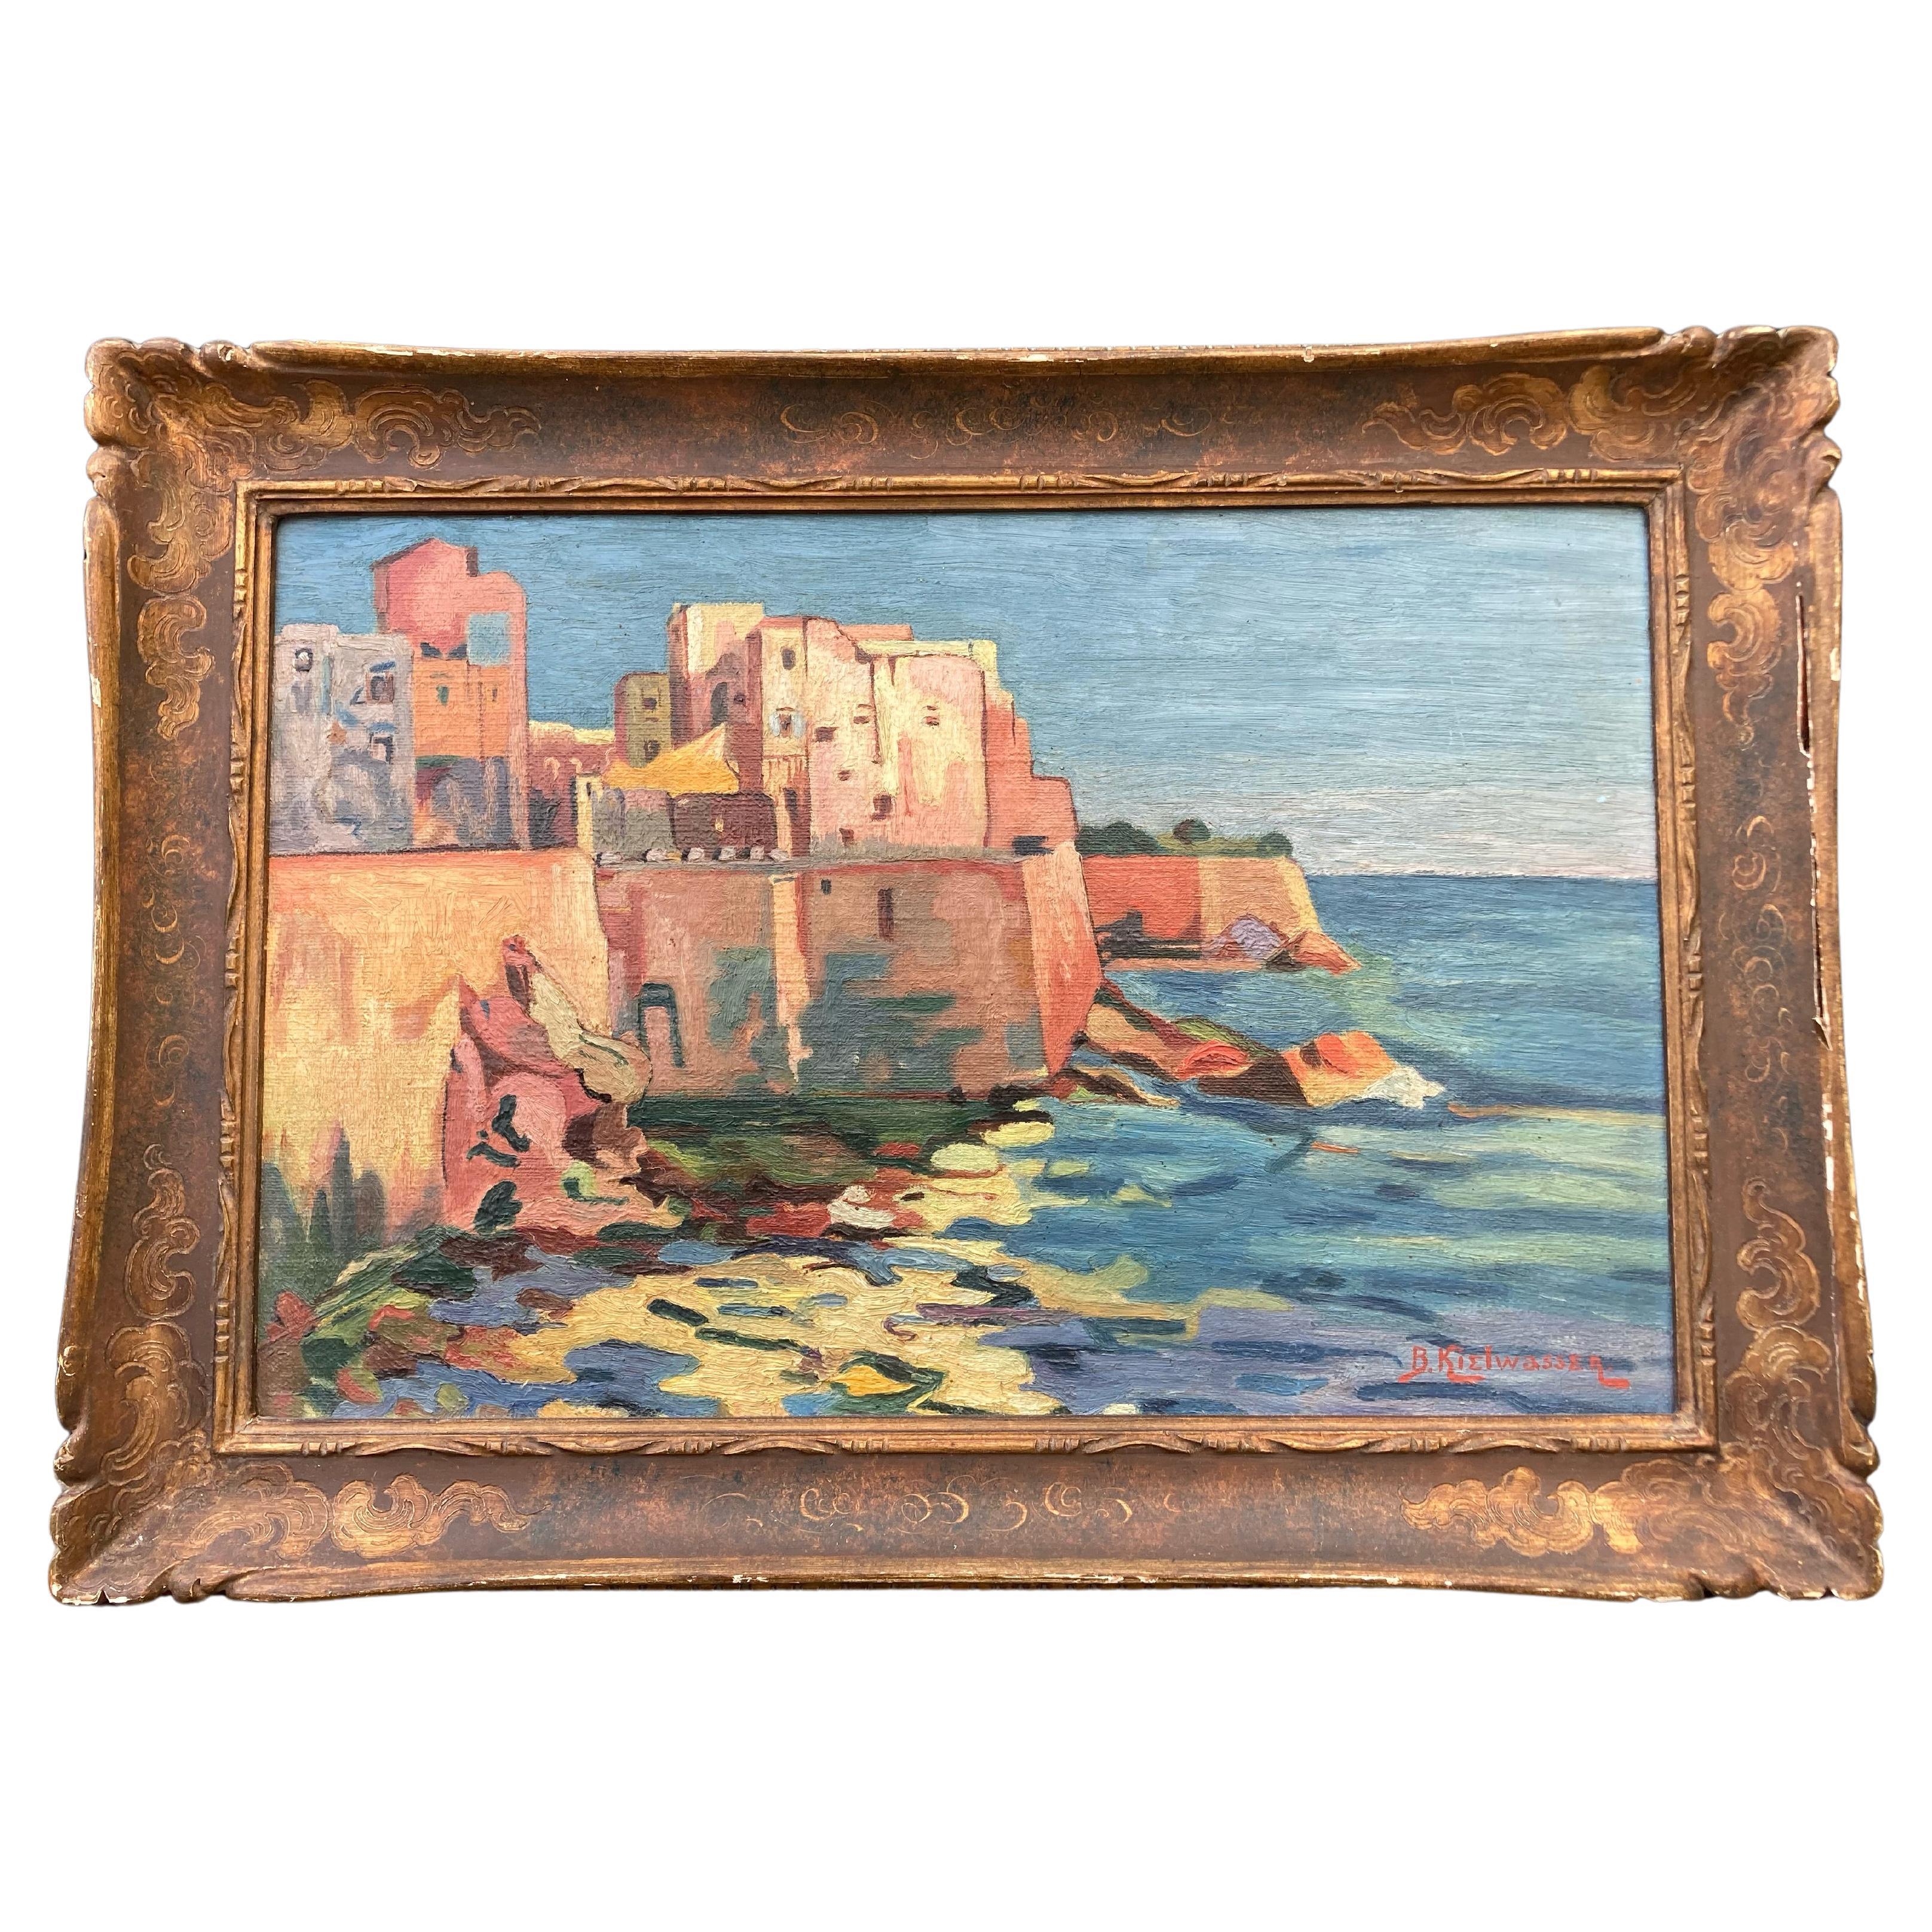 Framed 20th Century French Oil Painting on Canvas Board by Artist B. Kielwasser For Sale